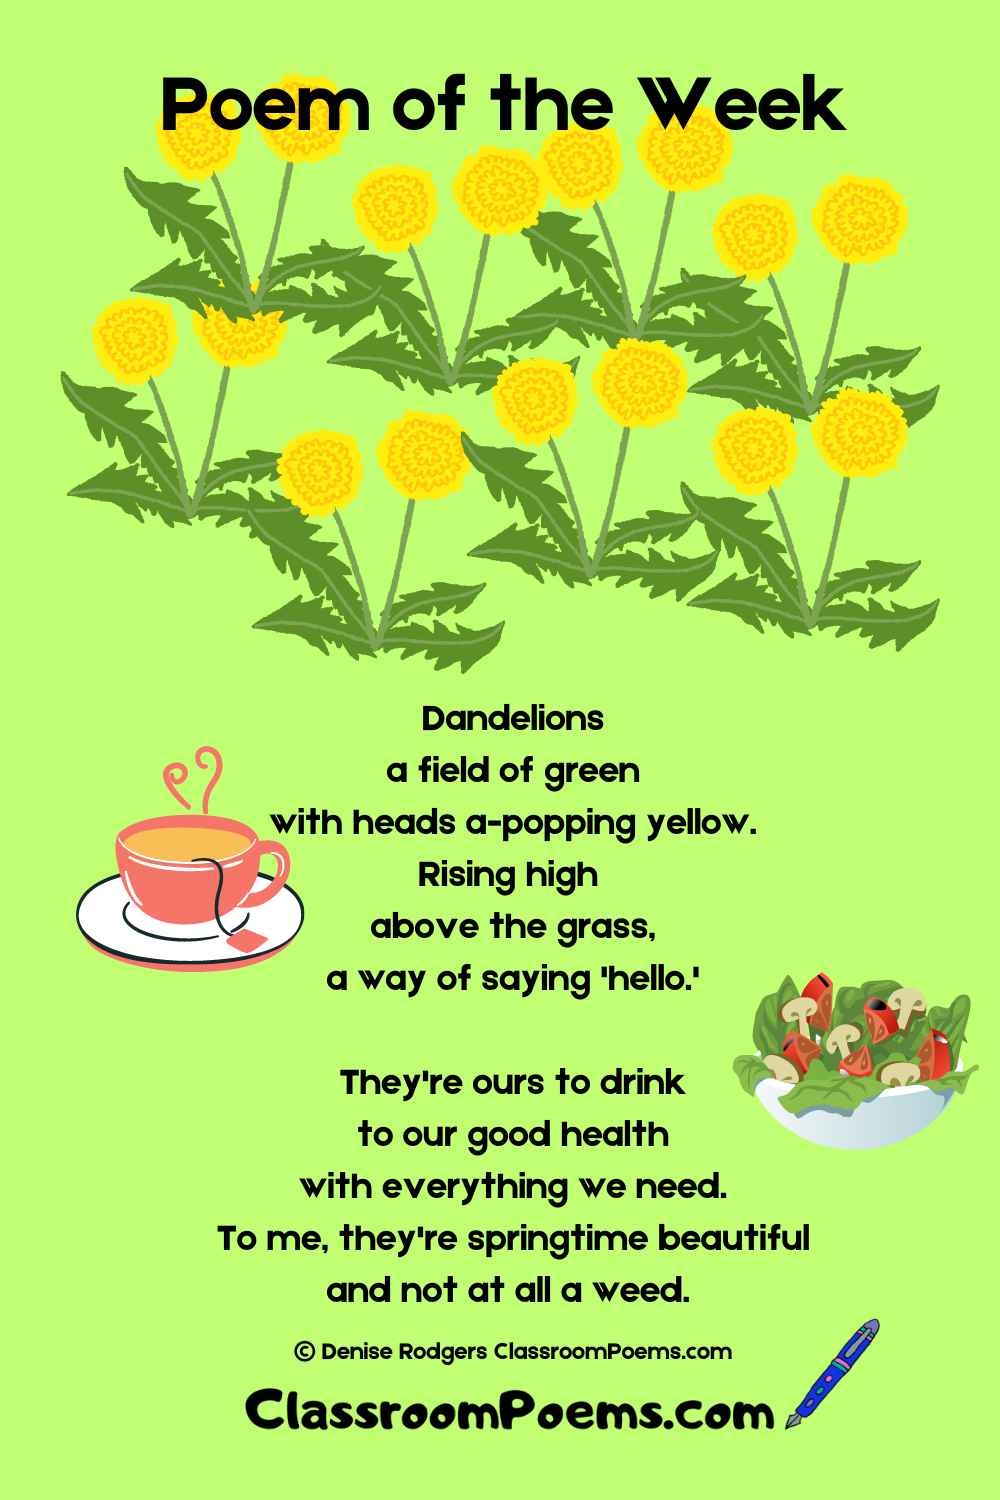 The Dandelion Poem of the Week by Denise Rodgers on ClassroomPoems.com.